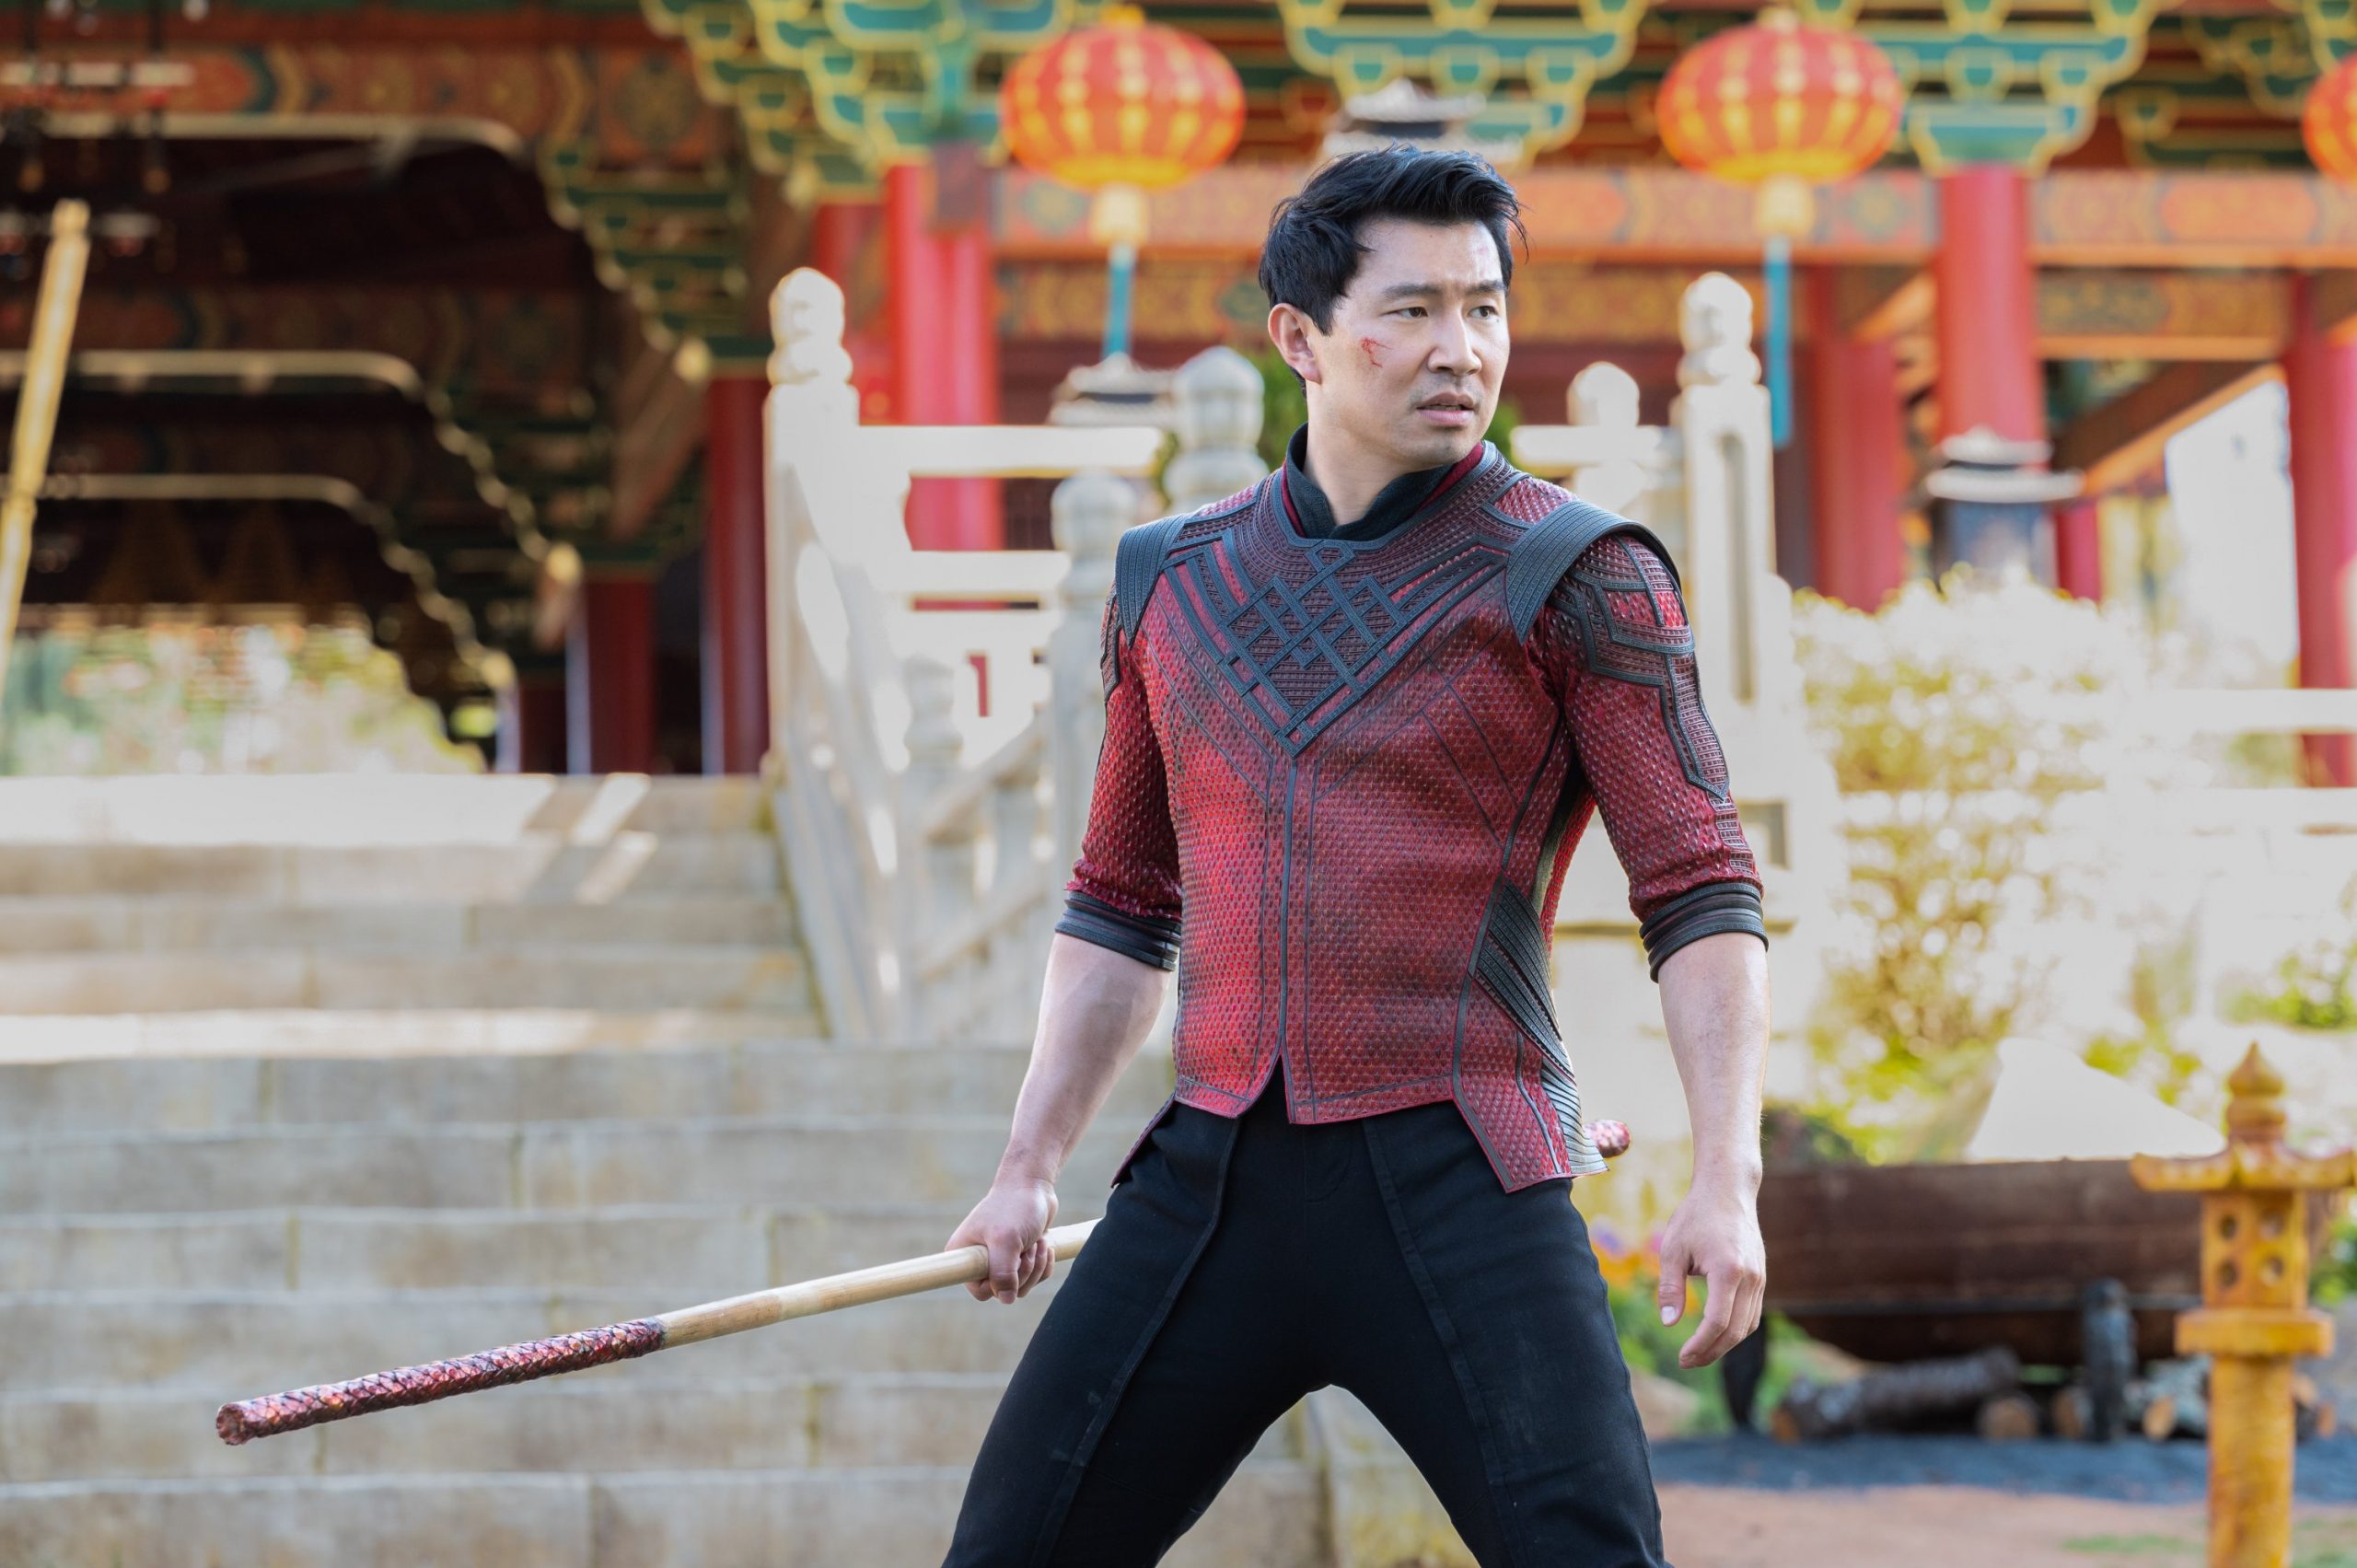 'Shang-Chi' tops box office again with $35.8 million